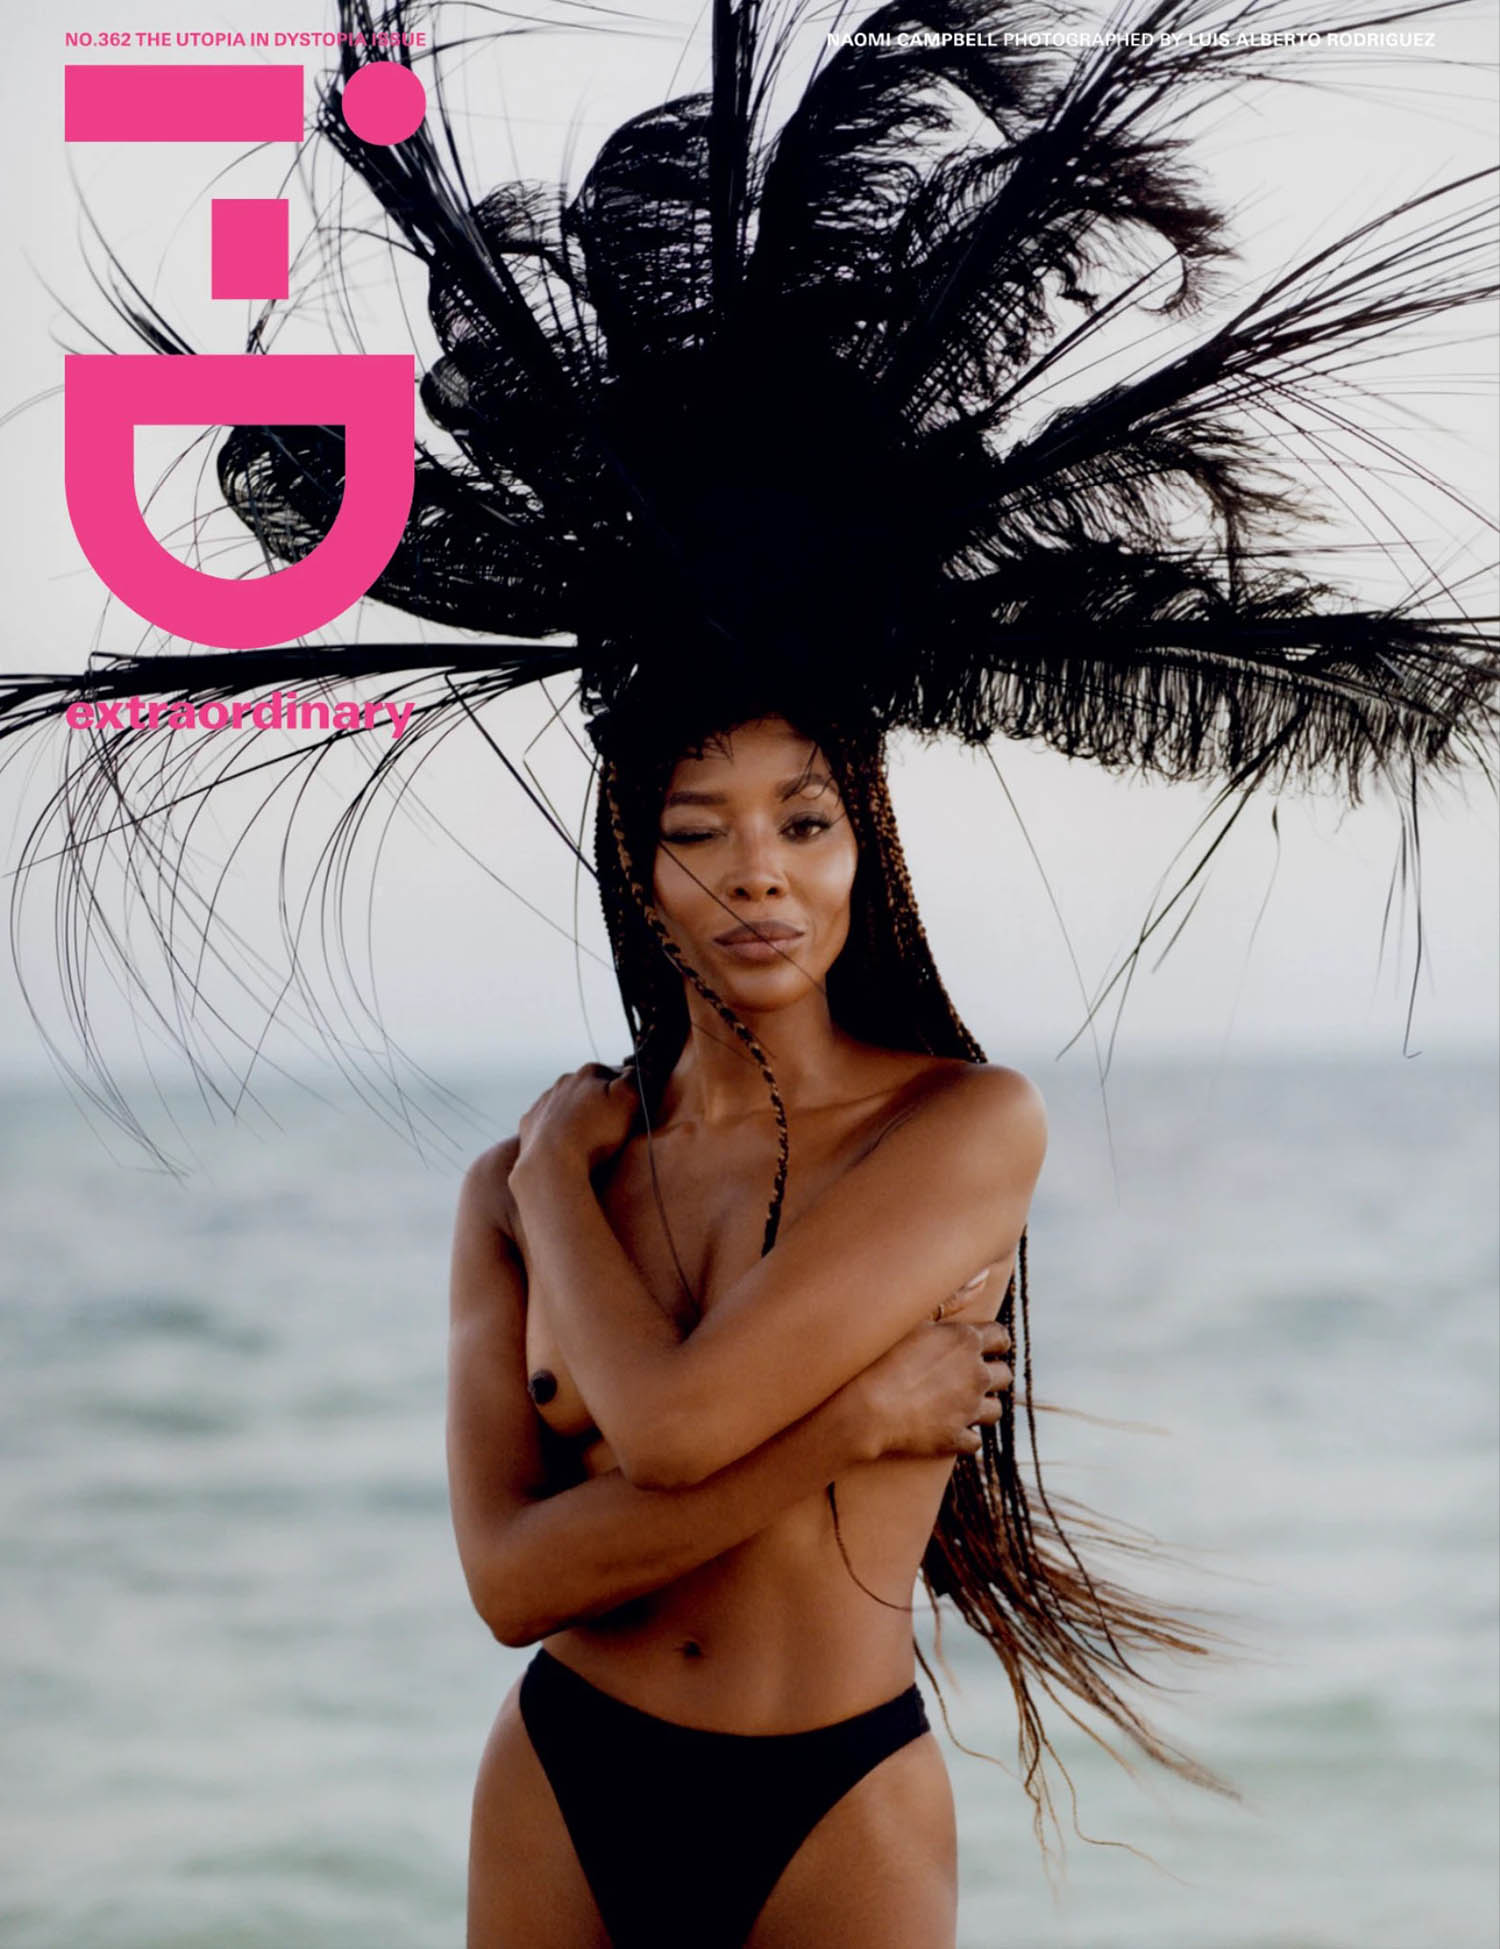 Naomi Campbell covers i-D Magazine Issue 362 by Luis Alberto Rodriguez